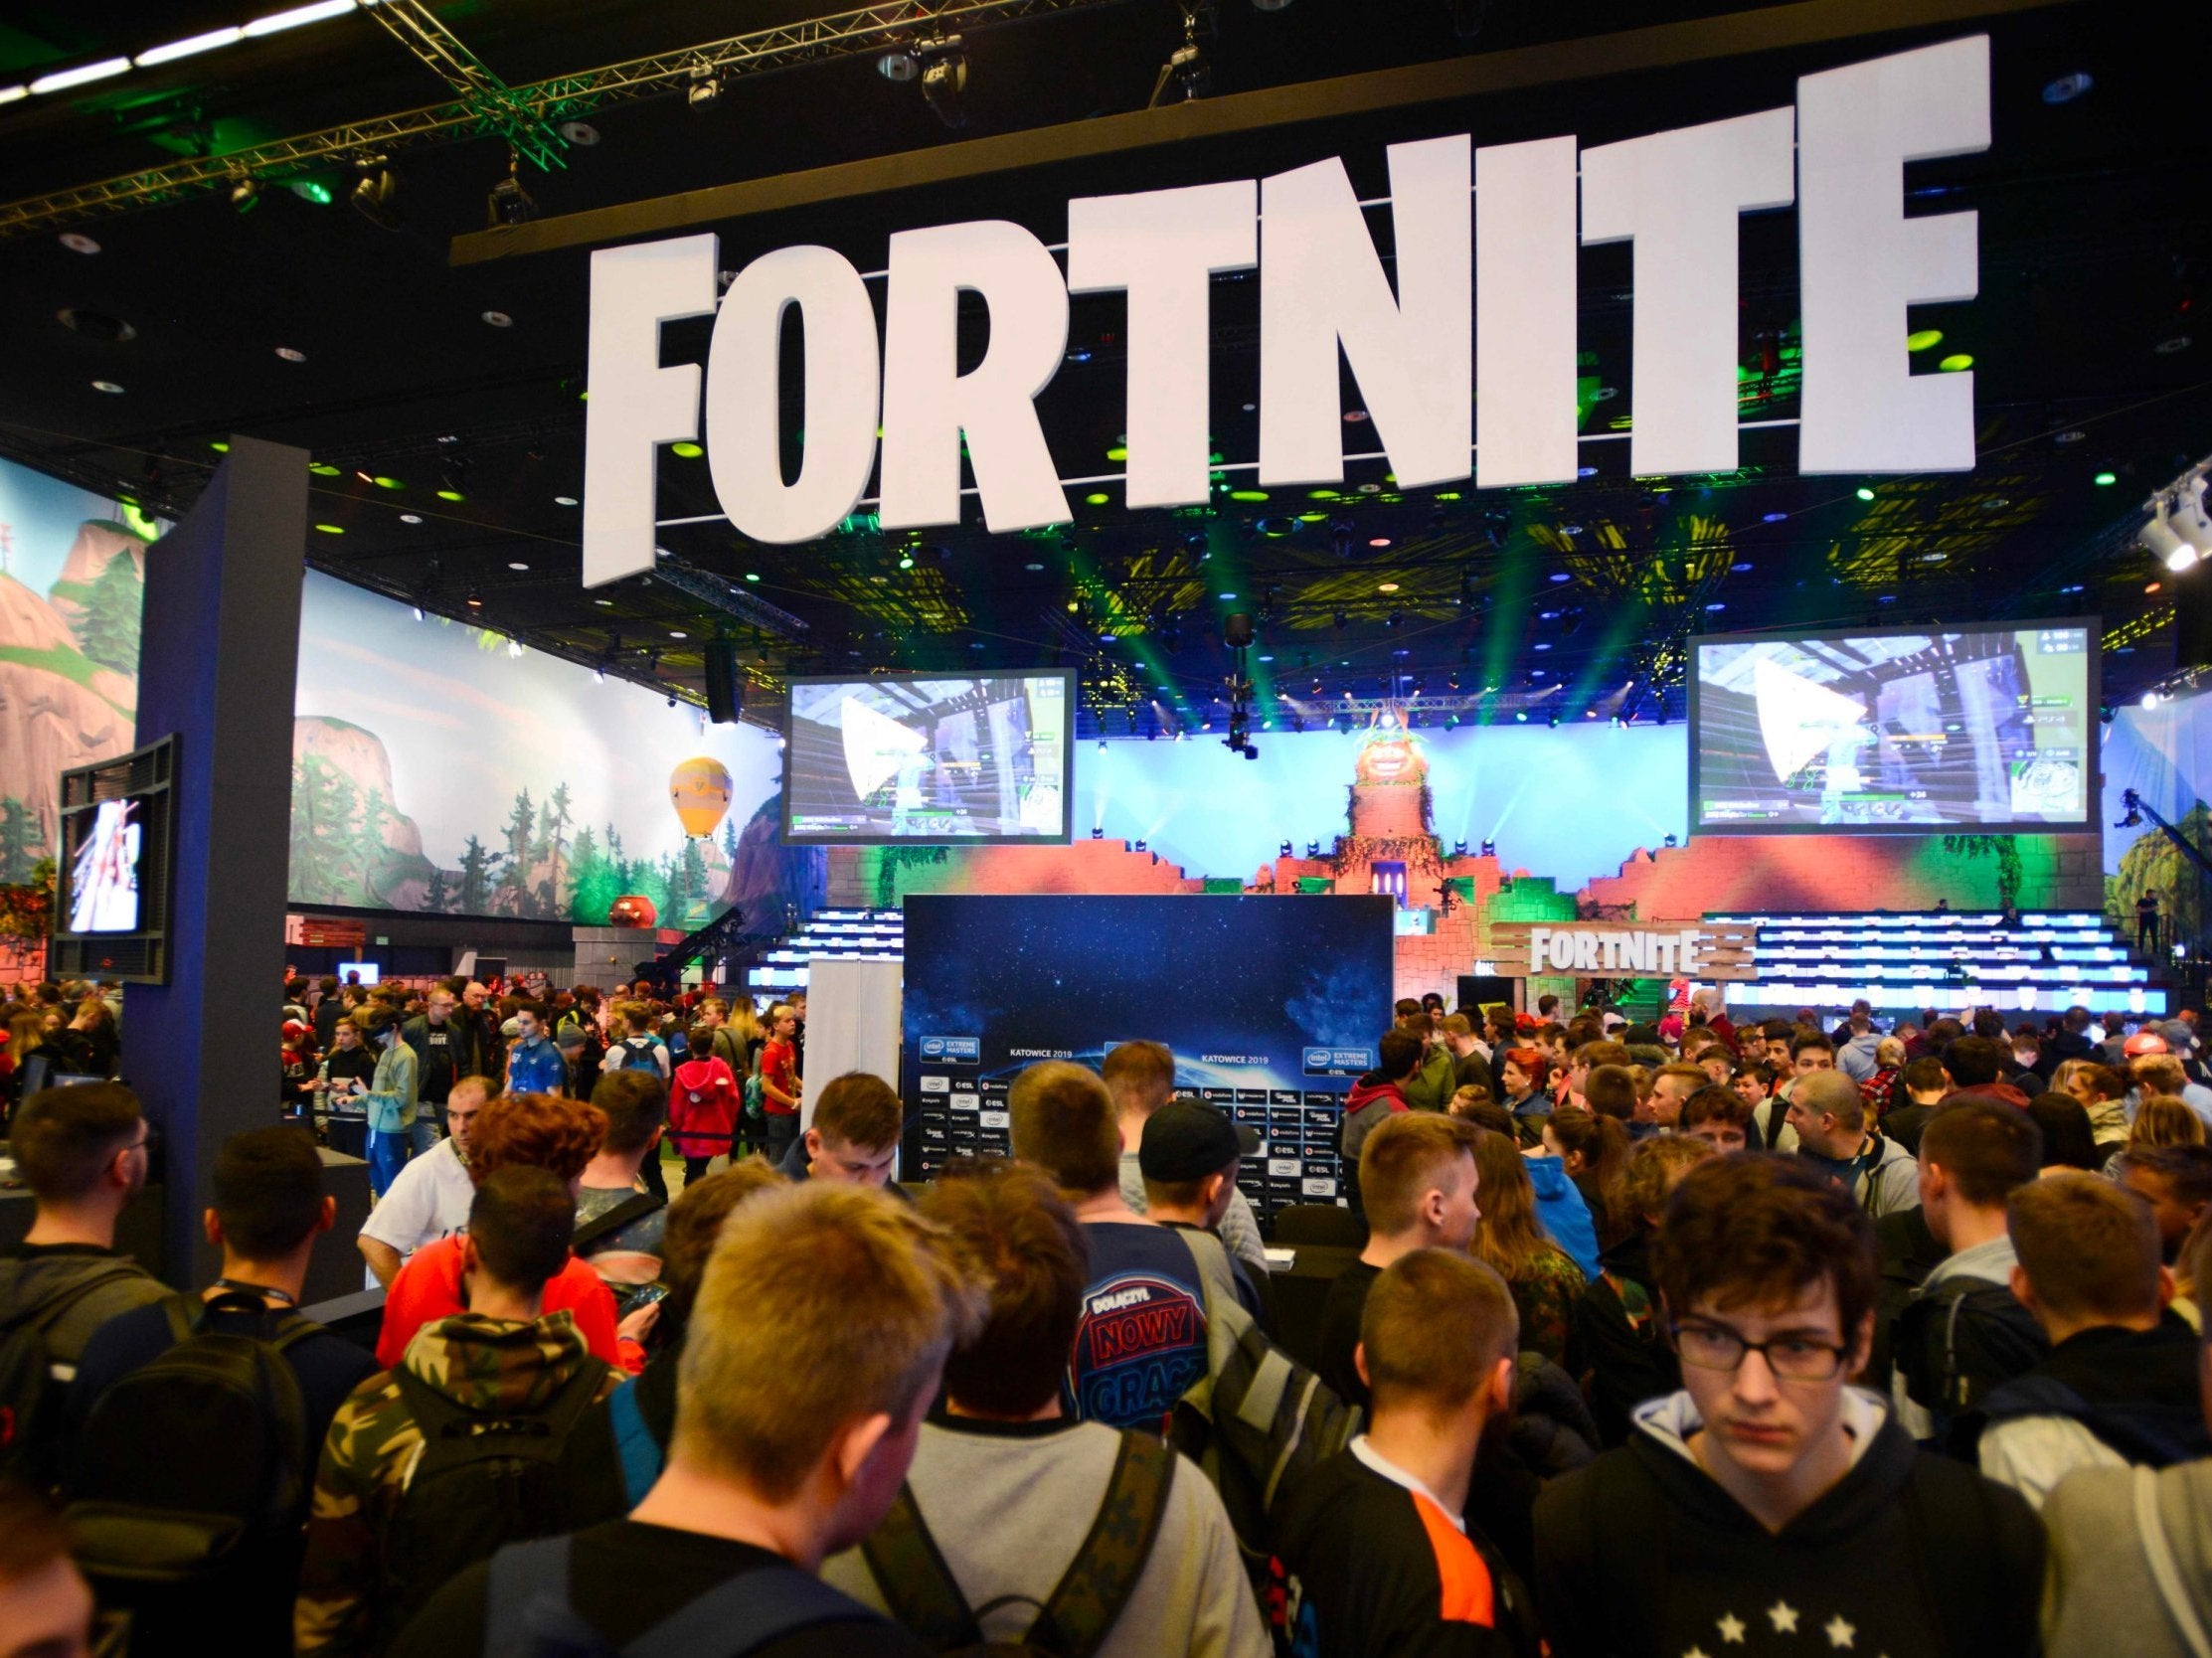 Fortnite Latest News Breaking Stories And Com!   ment The Independent - fortnite employees work 100 hour weeks to keep game a success